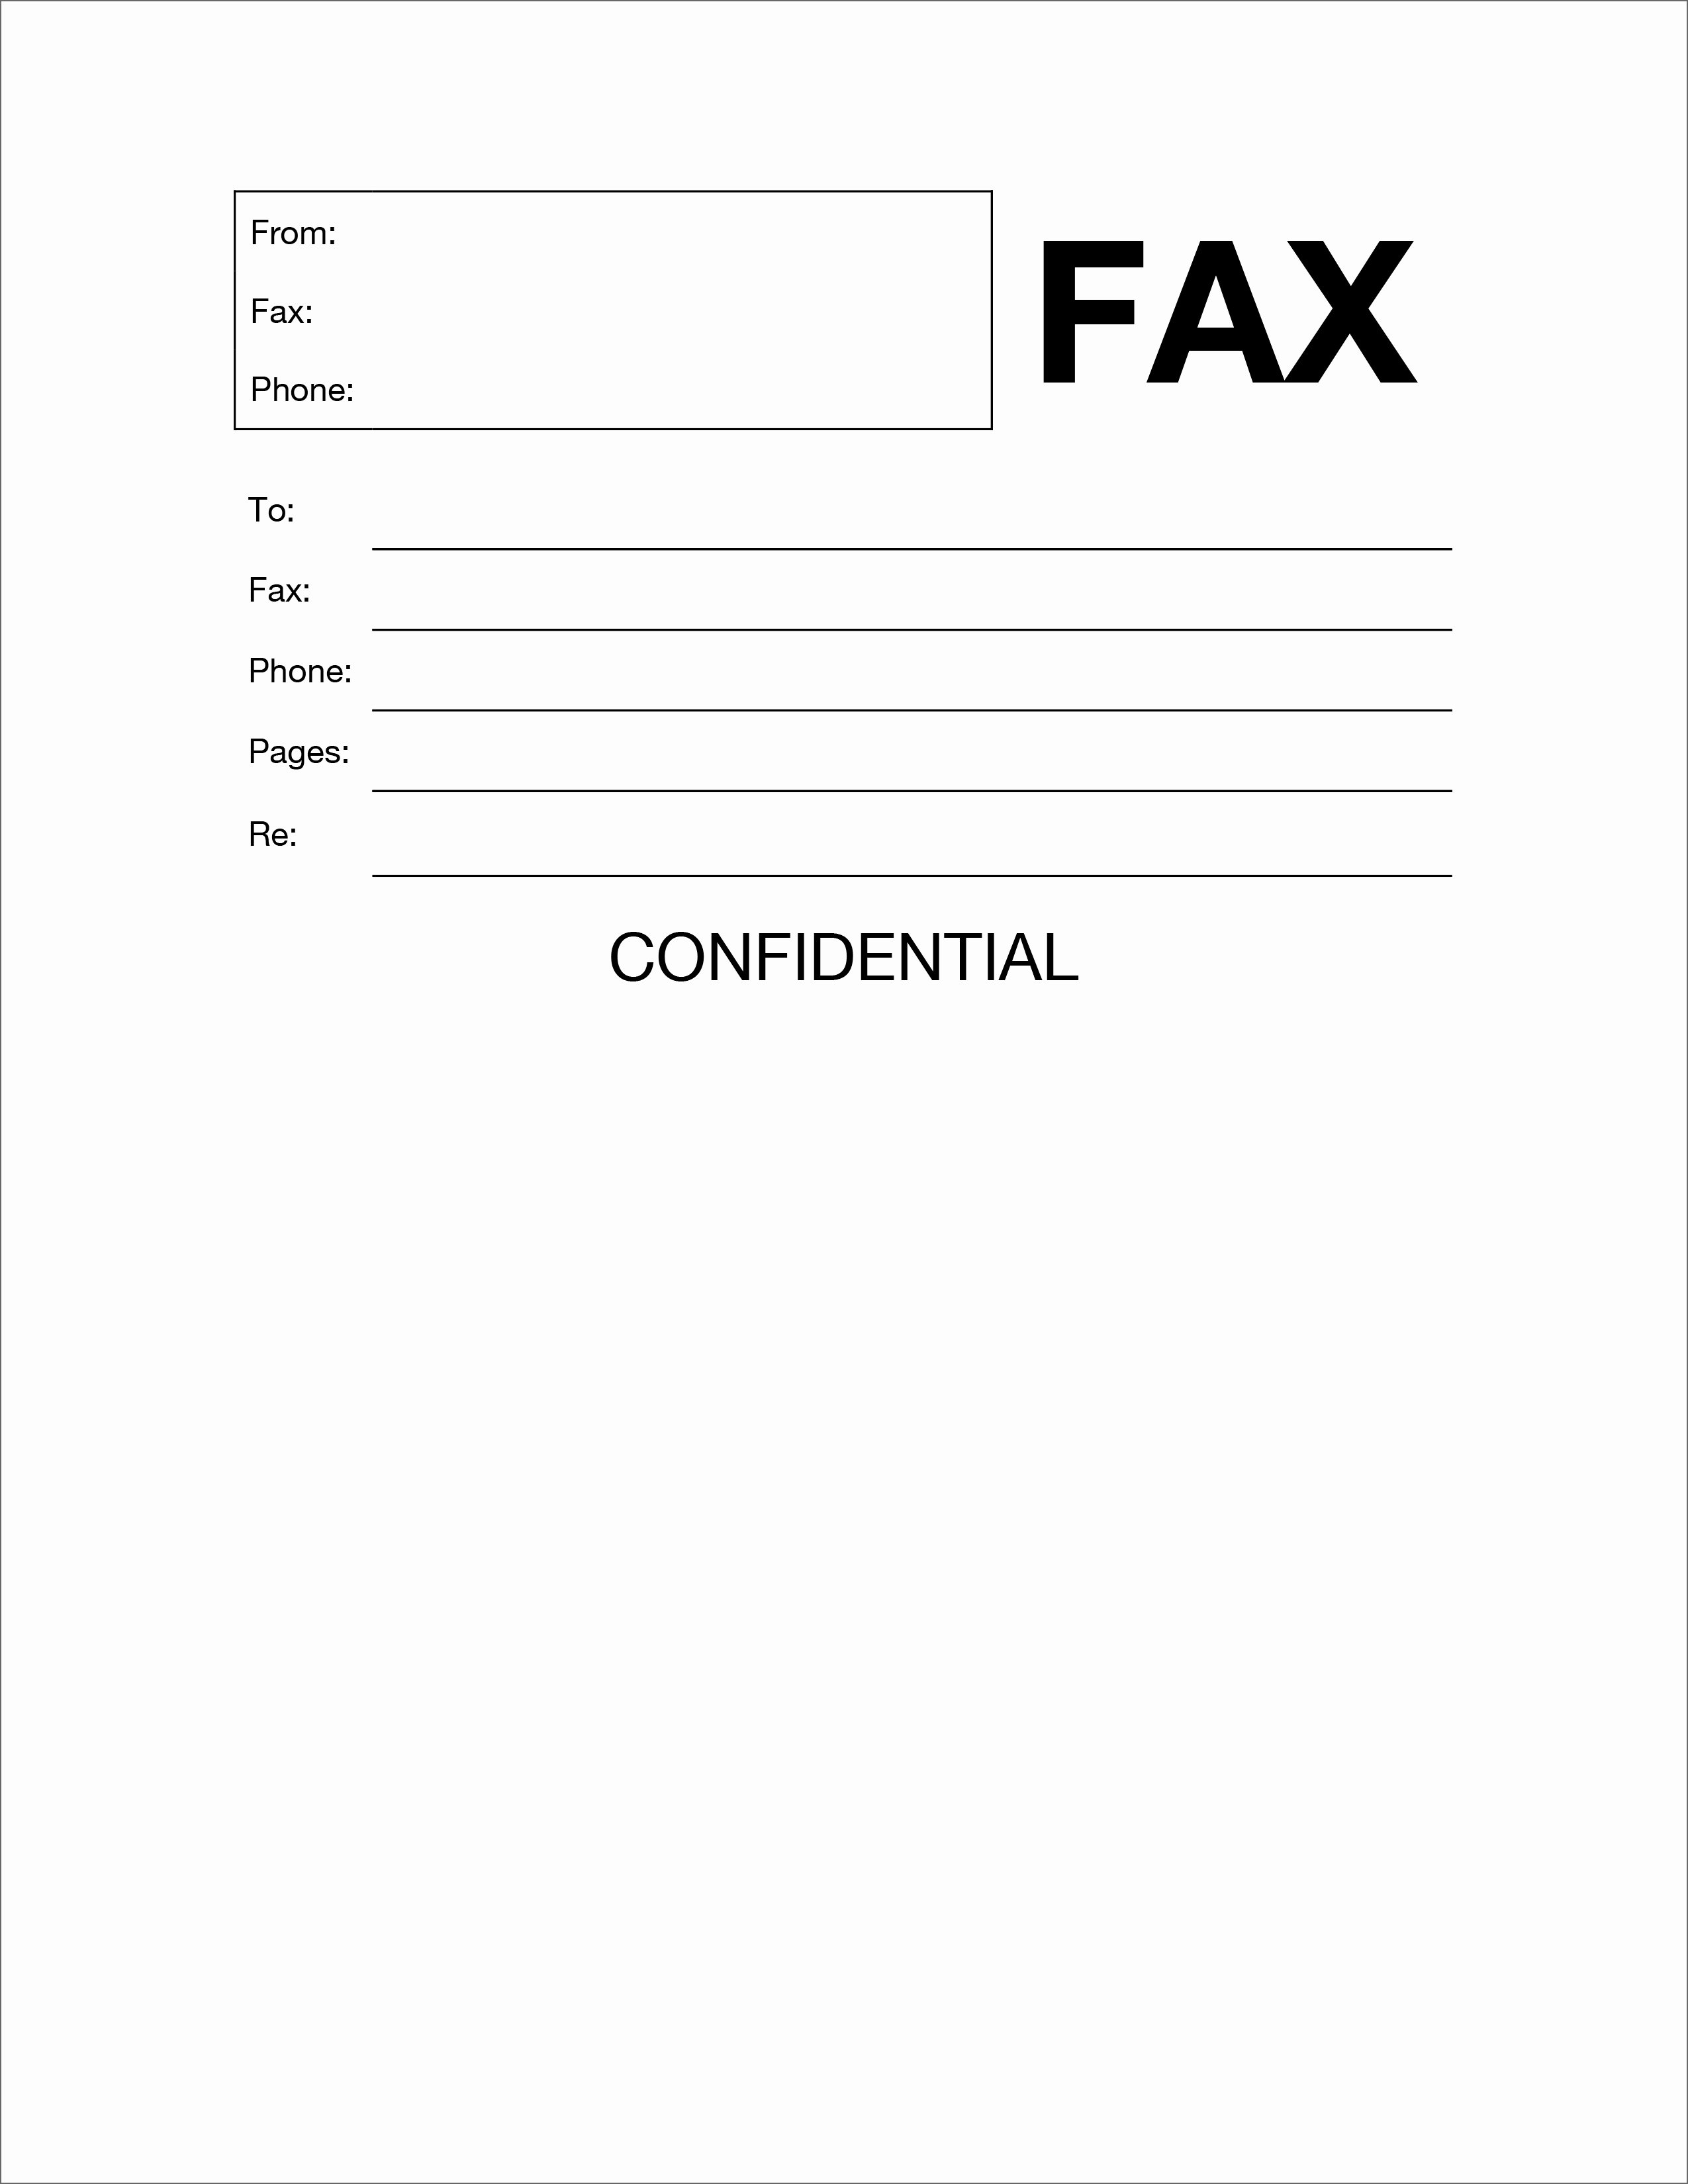 Fax Cover Sheet Template Free Luxury 20 Free Fax Cover Templates Sheets In Microsoft Fice Docx